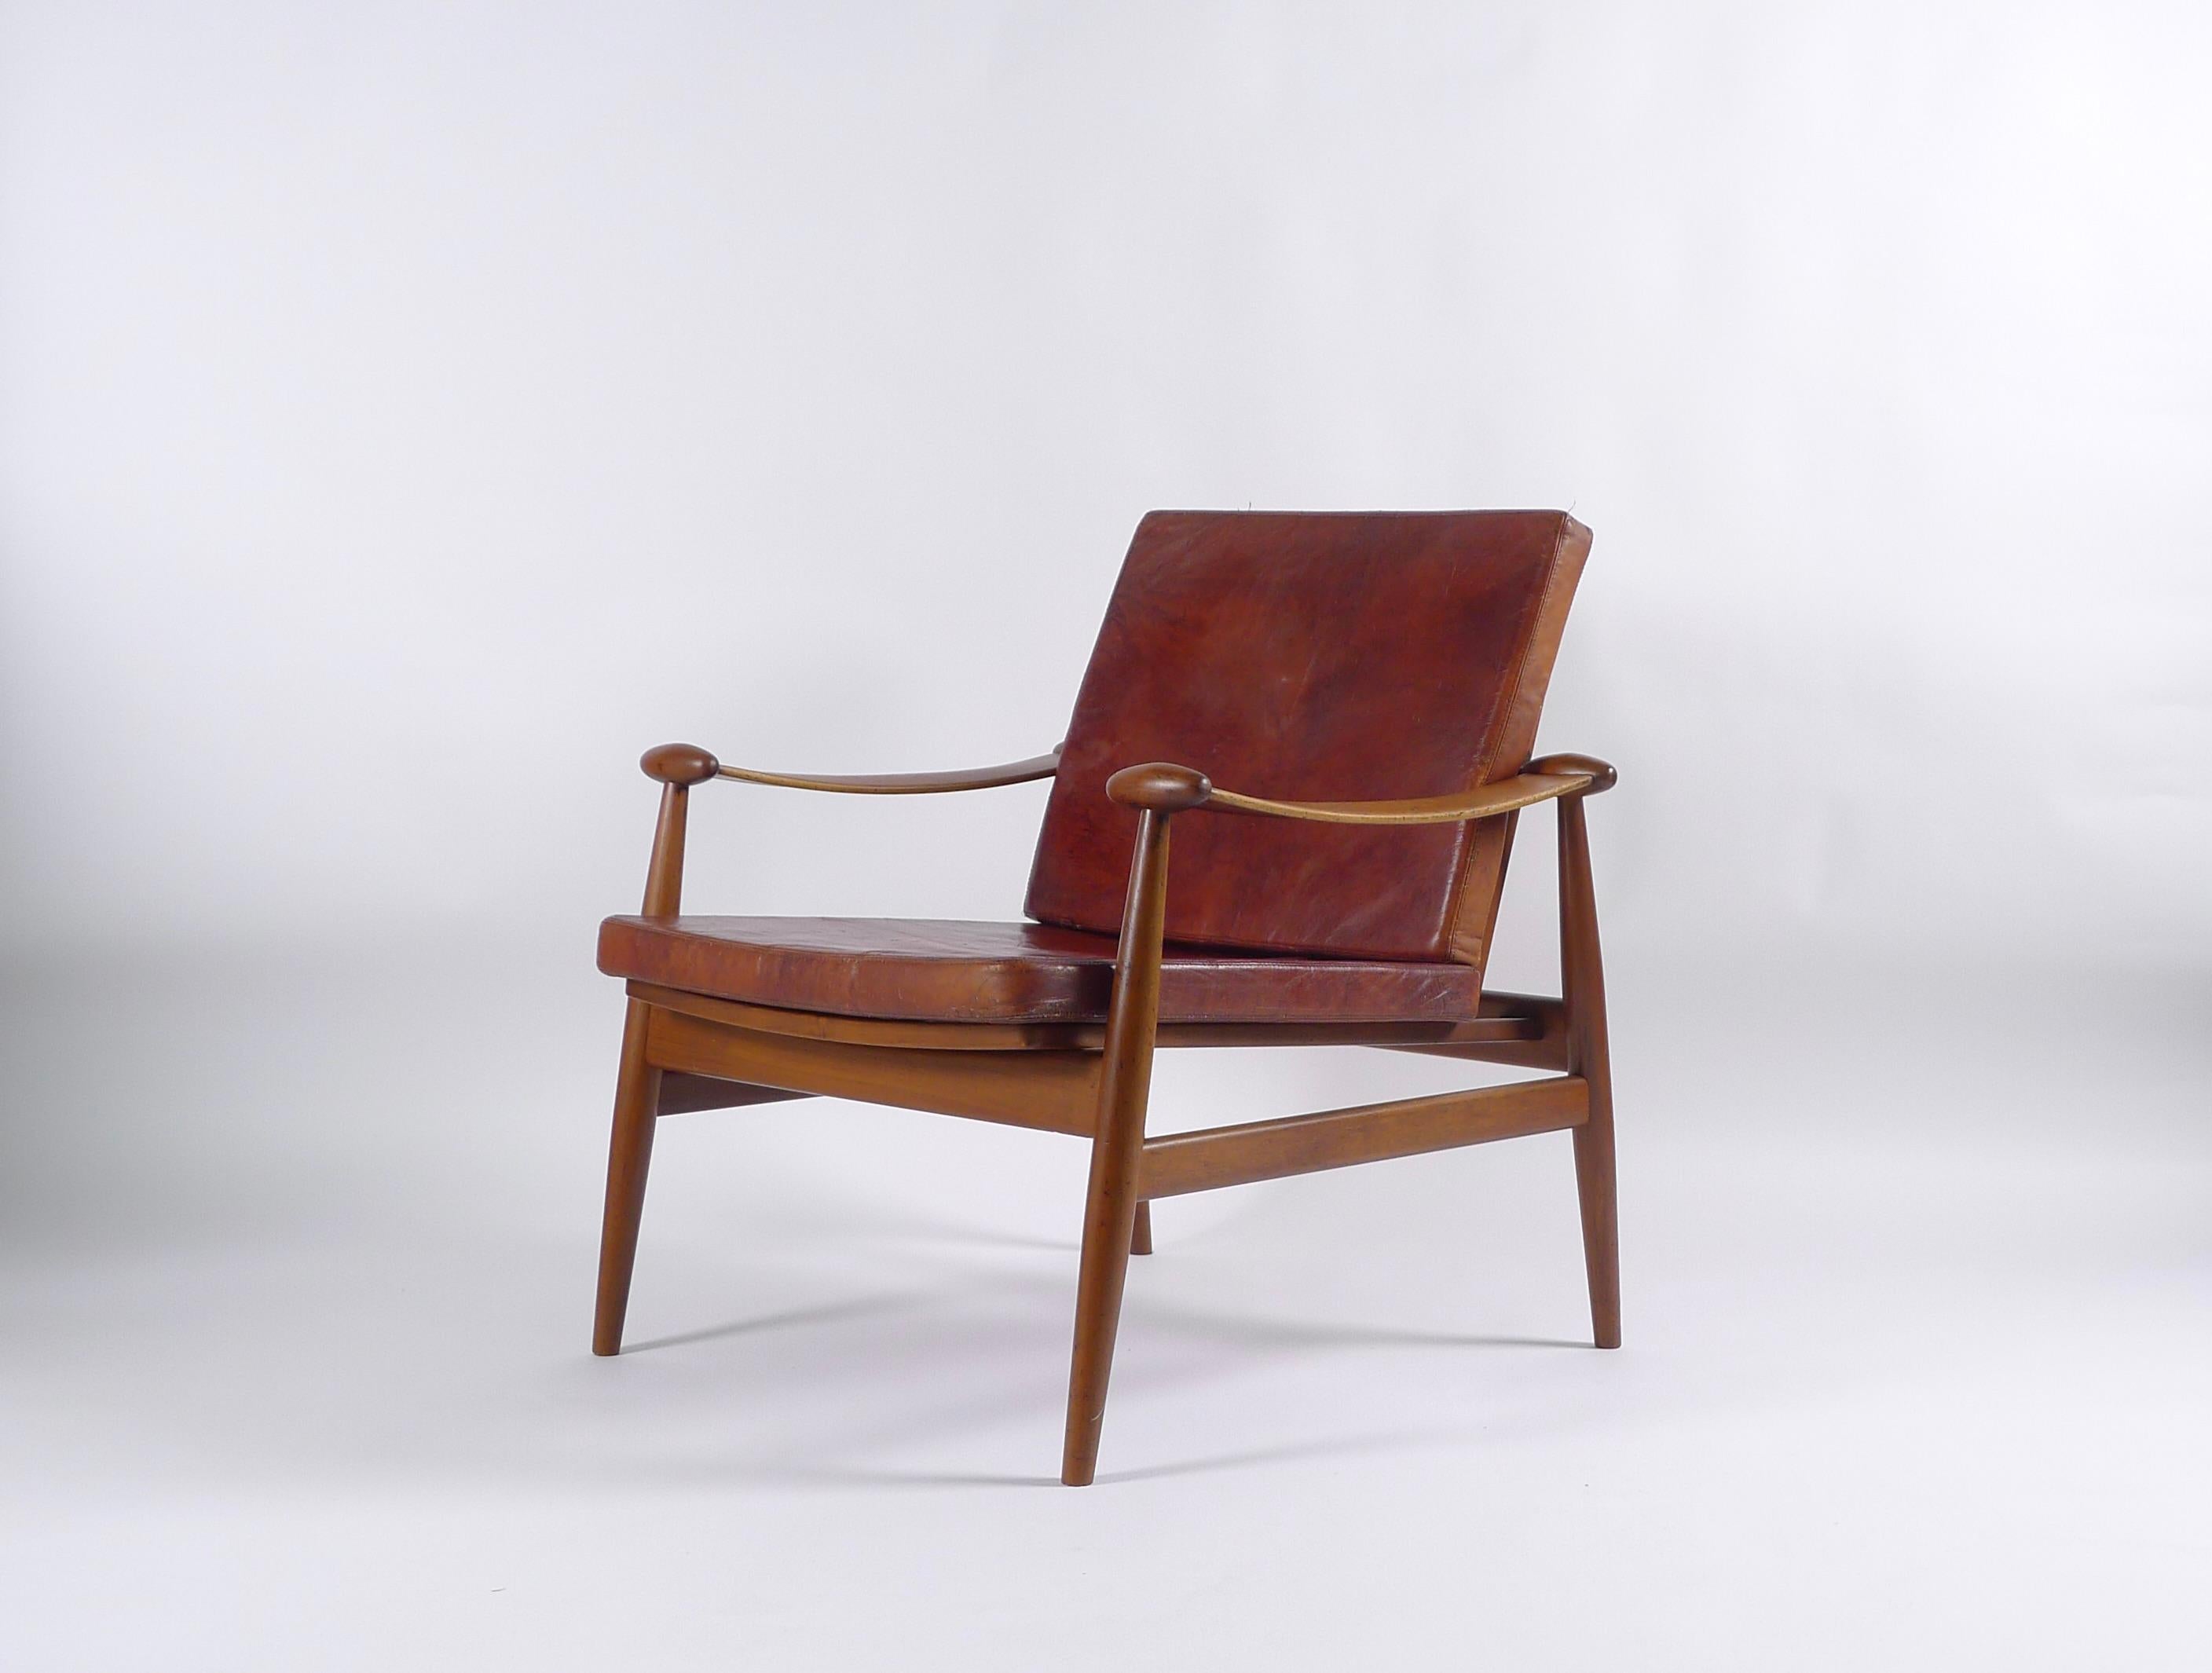 Mid-20th Century Finn Juhl Spade Chair, Model Fd133, 1950s, Produced by France & Son, with Label